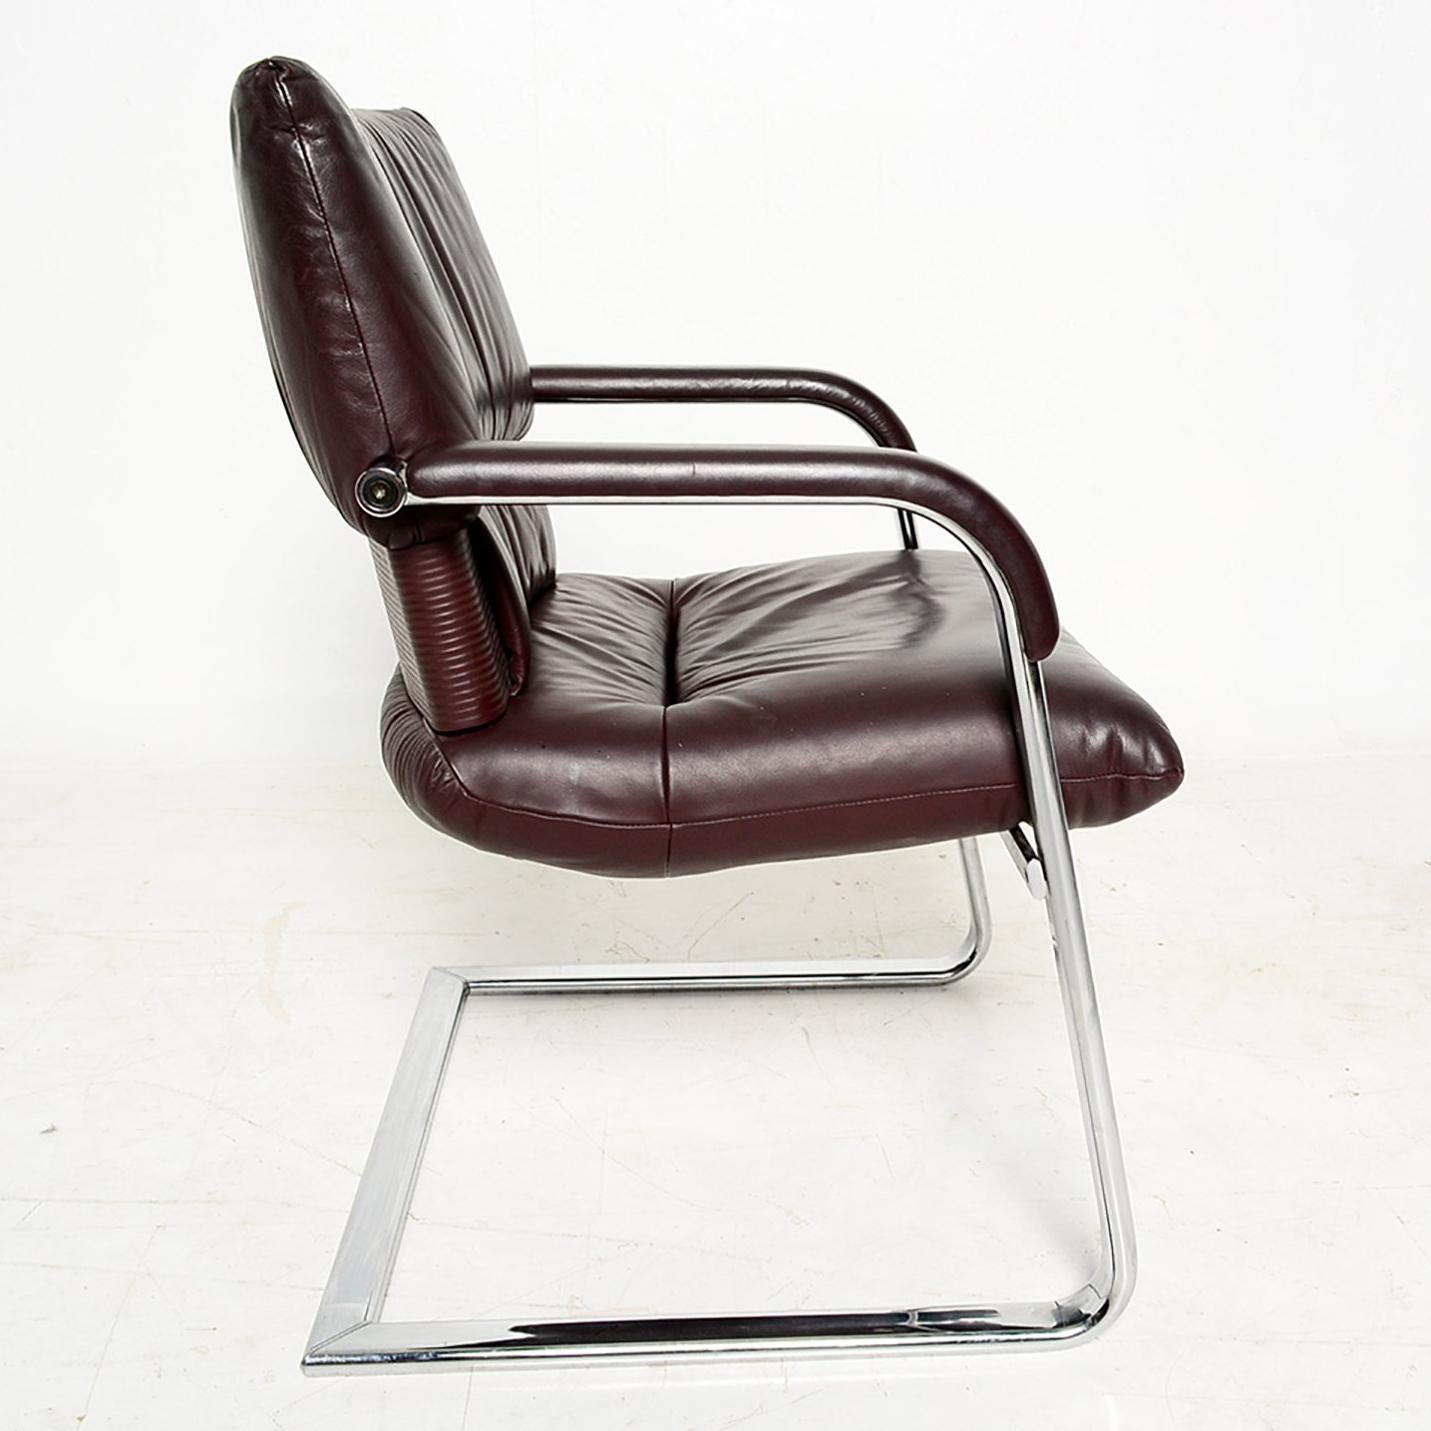 Italian Pair of Imago Chairs by Mario Bellini for Vitra Mid Century Modern 